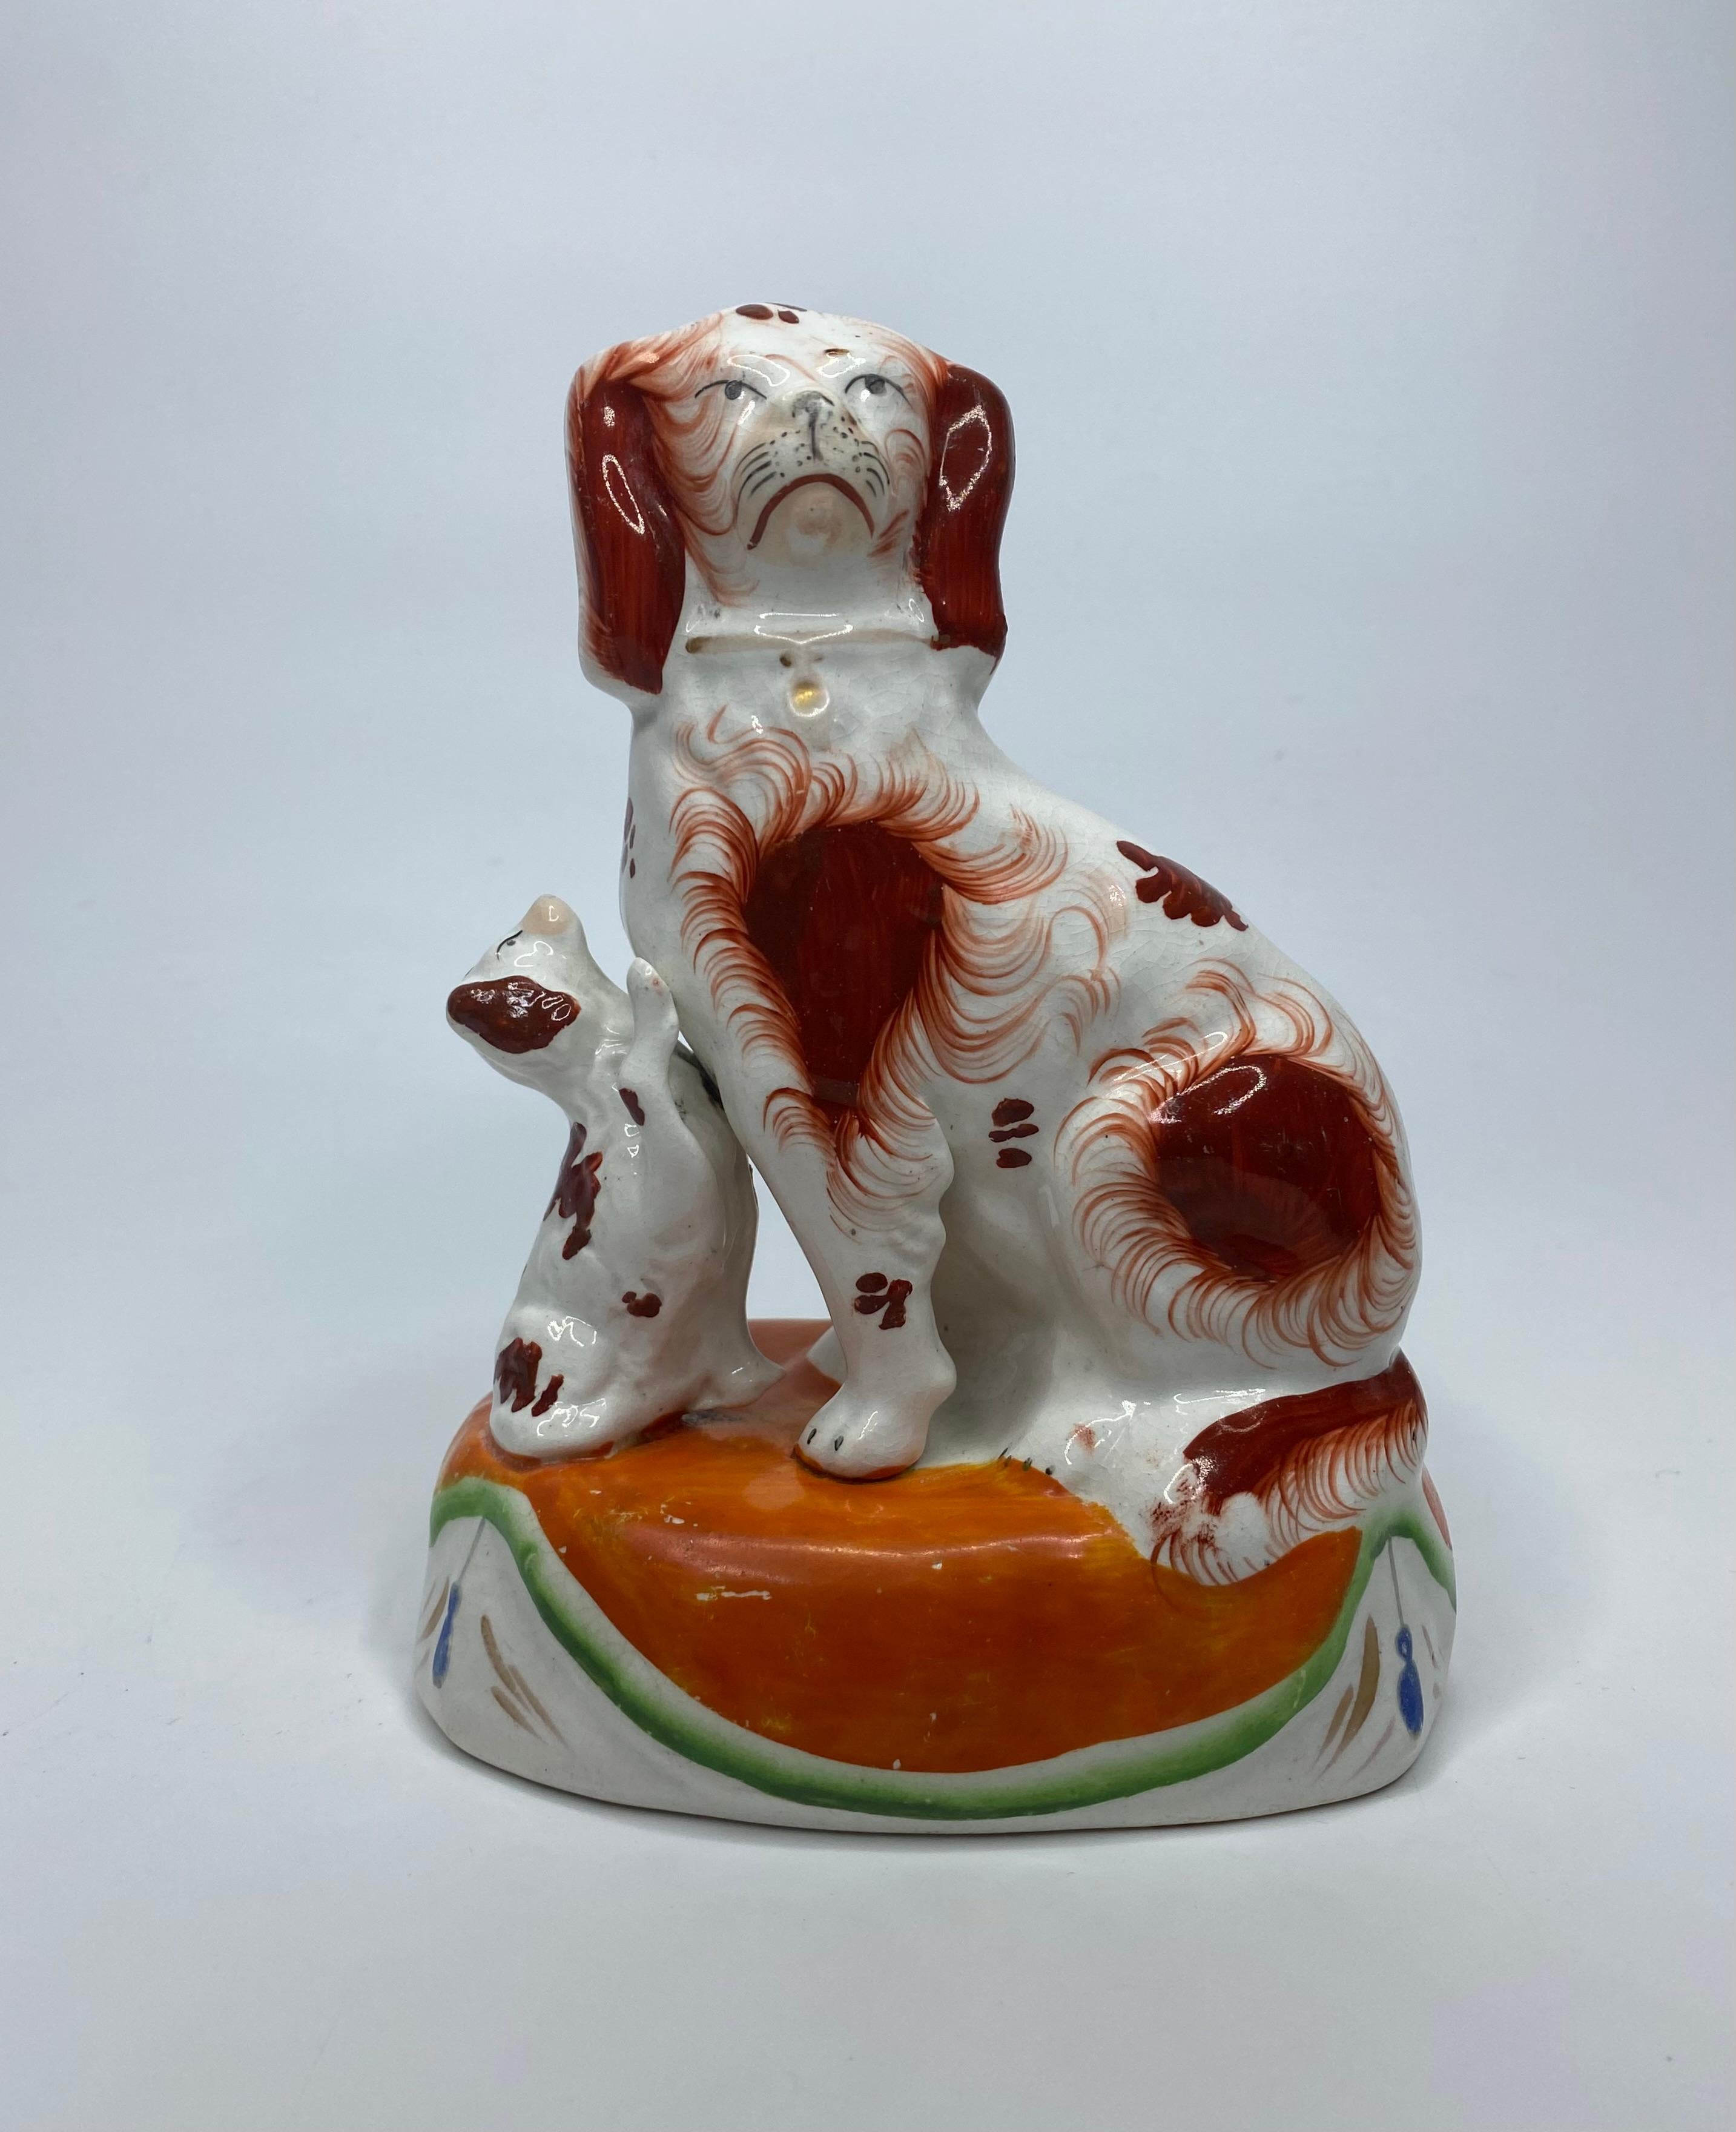 English Pair Staffordshire Spaniels with puppies, c. 1850.